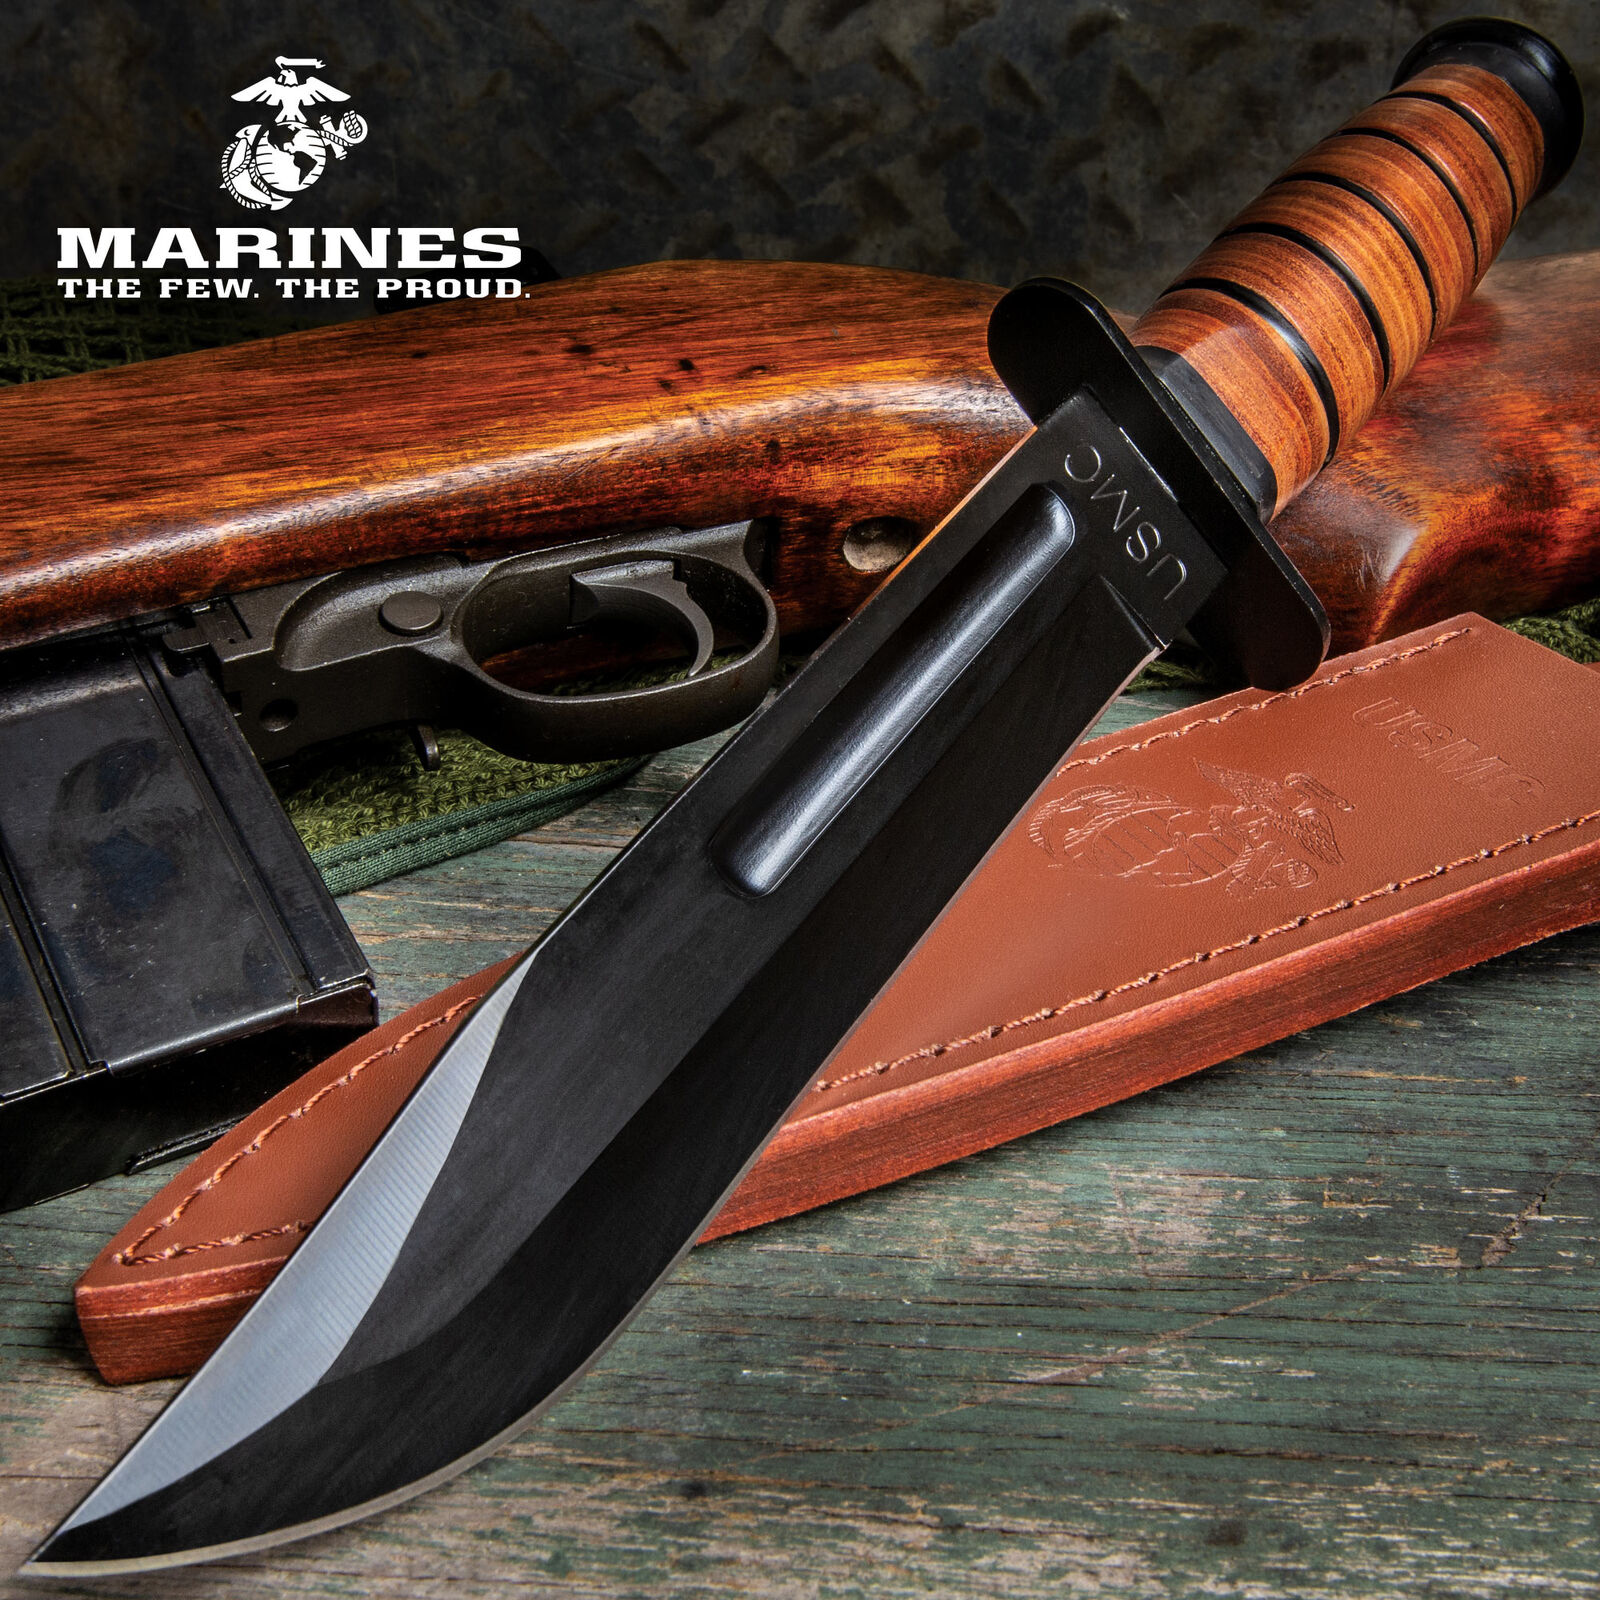 USMC MARINES TACTICAL BOWIE SURVIVAL HUNTING KNIFE MILITARY Combat Fixed Blade